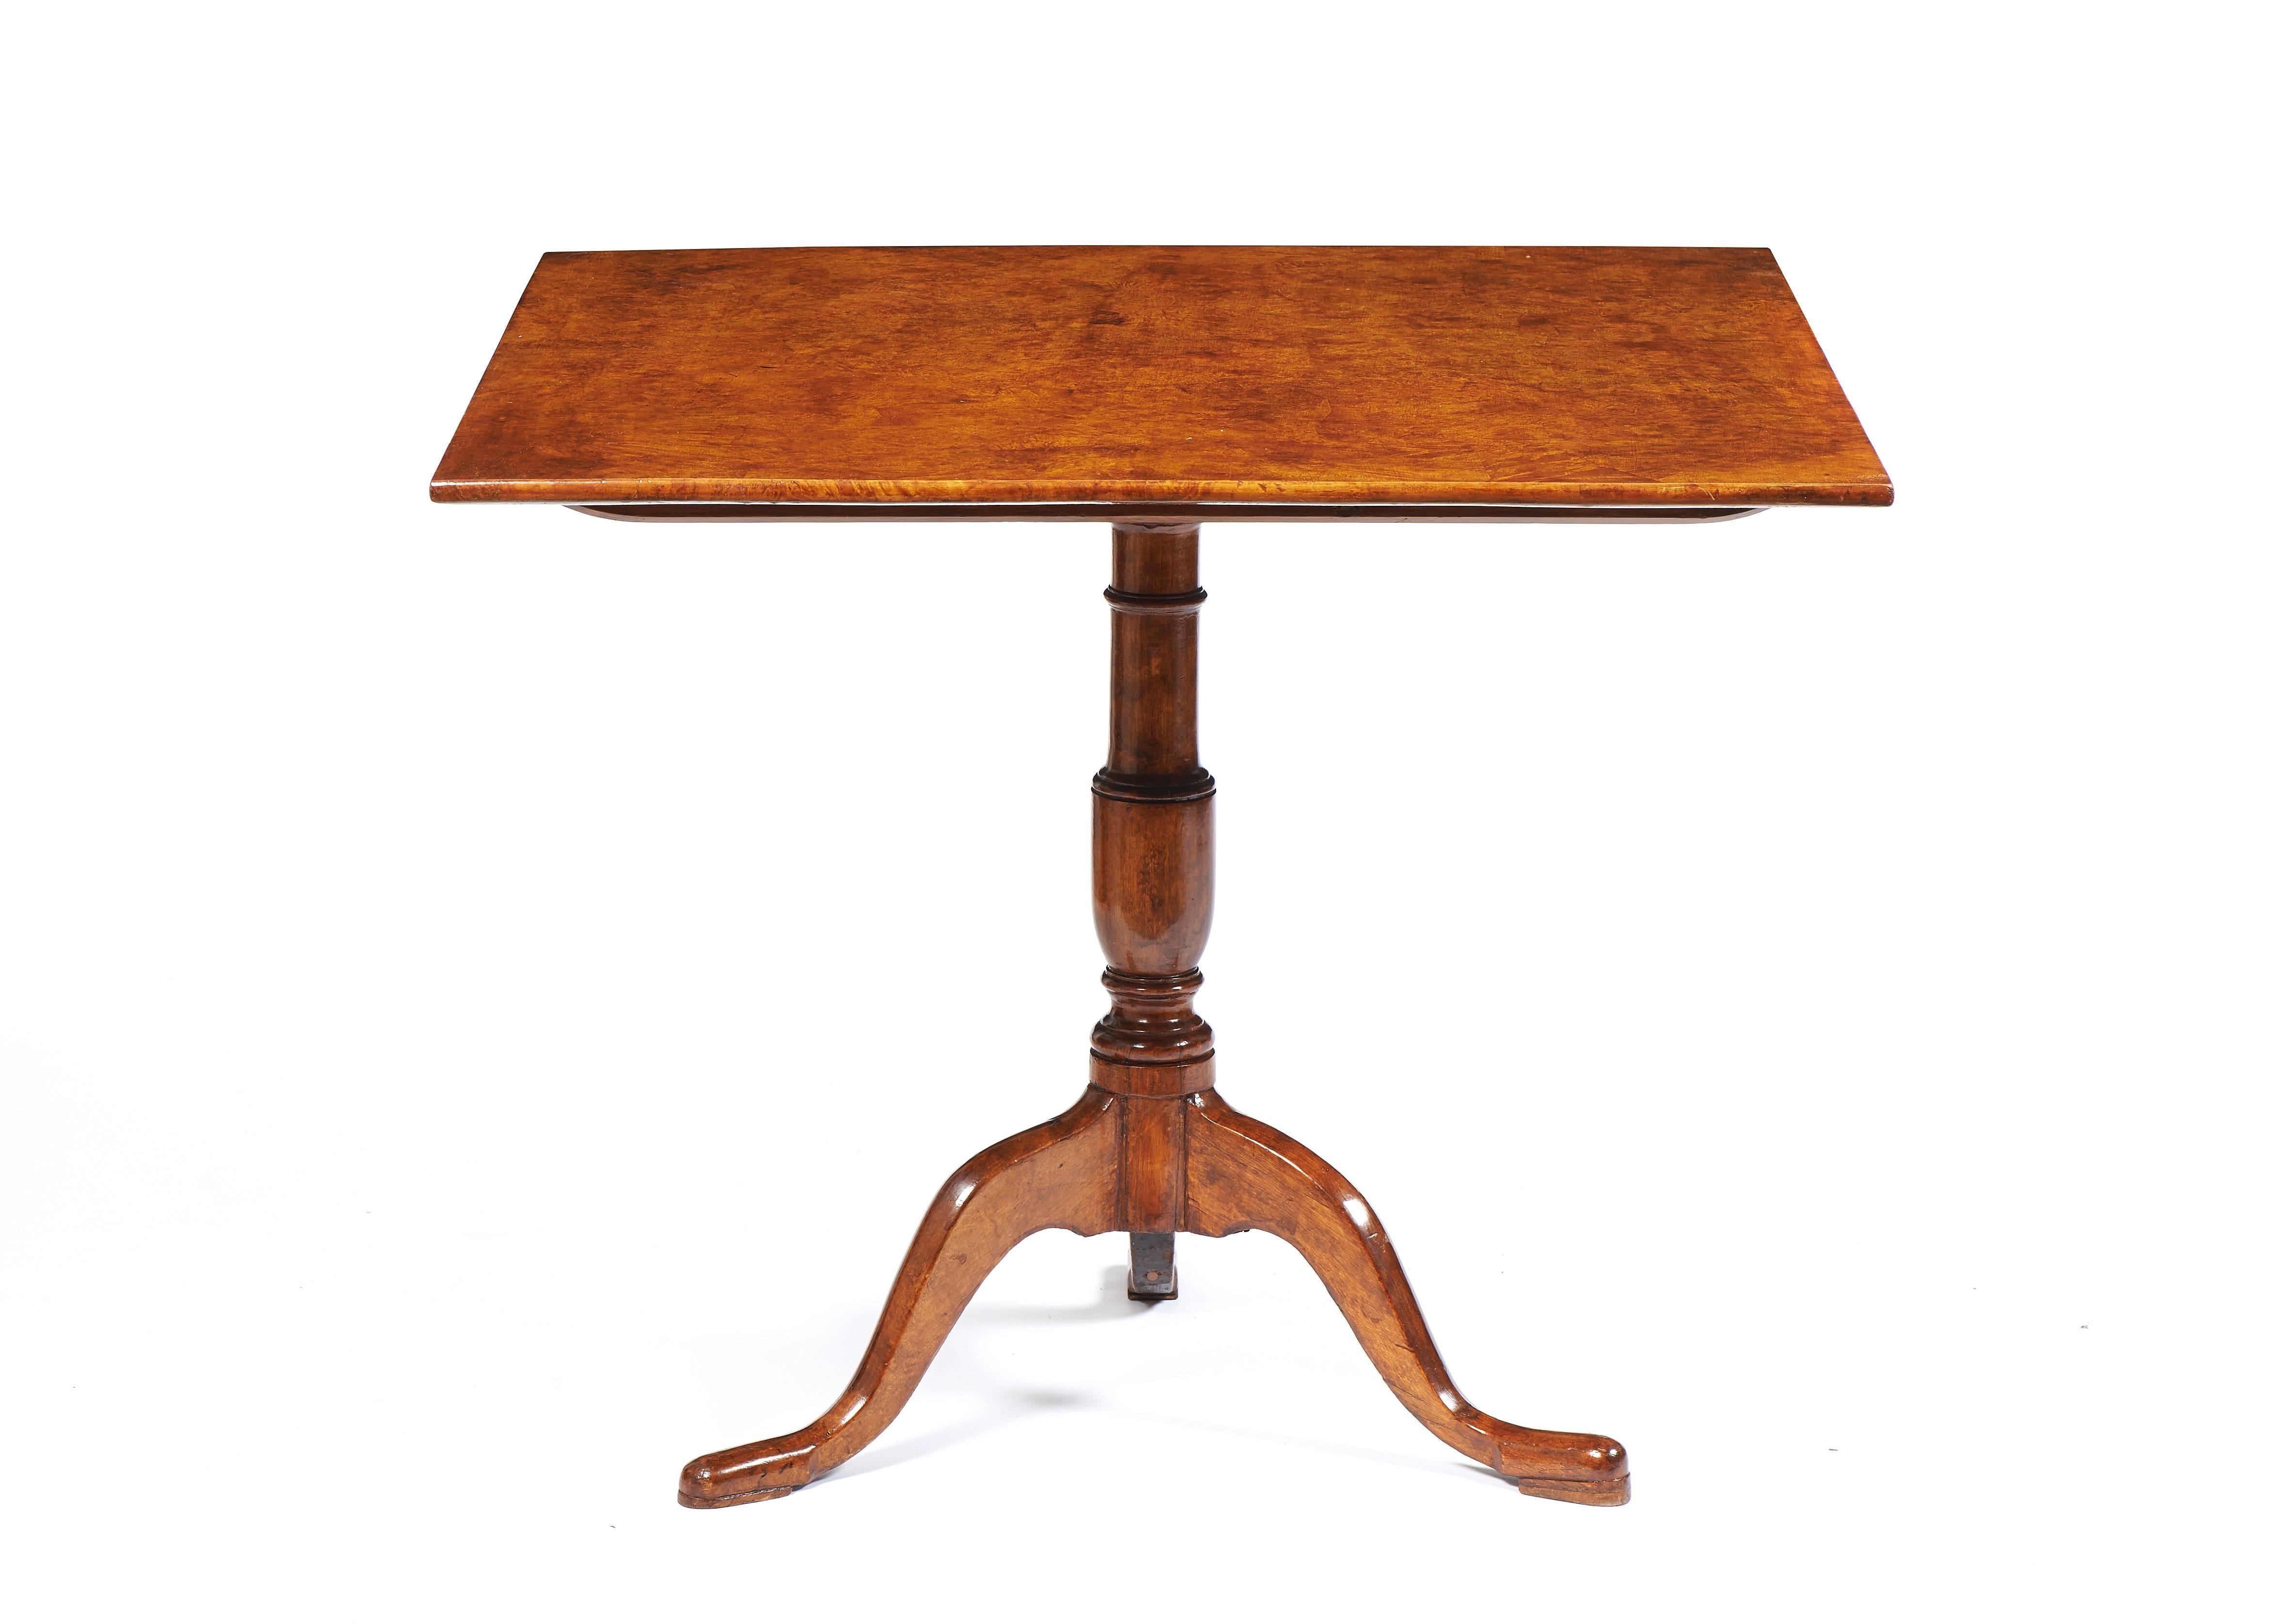 For sale on 1st dibs an 18th Century Swedish Square Side Table with a tri-pod stand, this table is made of a light wood and sober design. The amboine root is matched as if it was a puzzle. The result is a table that can easily work either on a